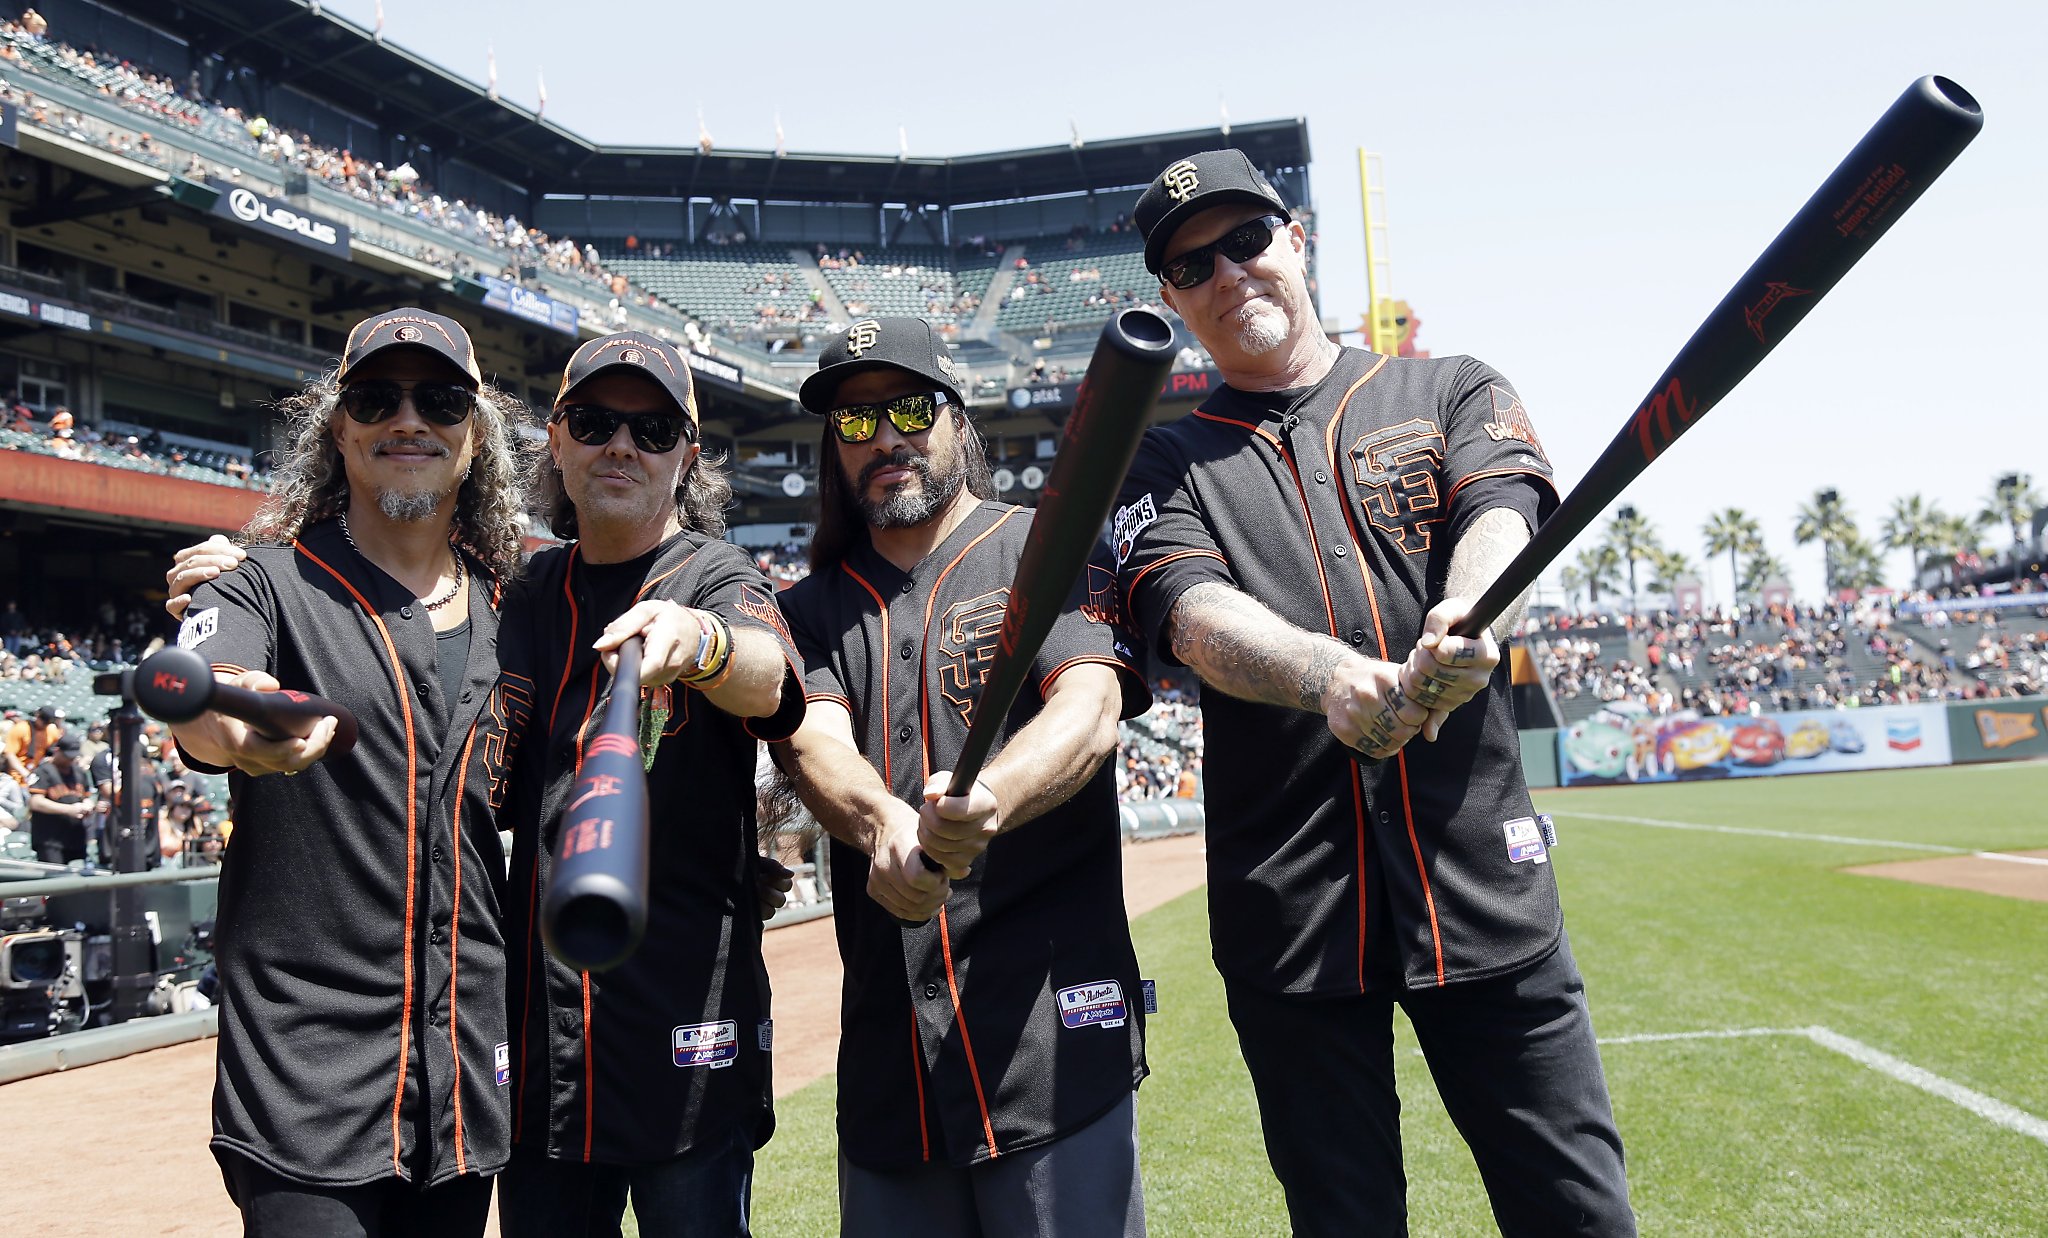 Metallica's annual night with the San Francisco Giants set for April